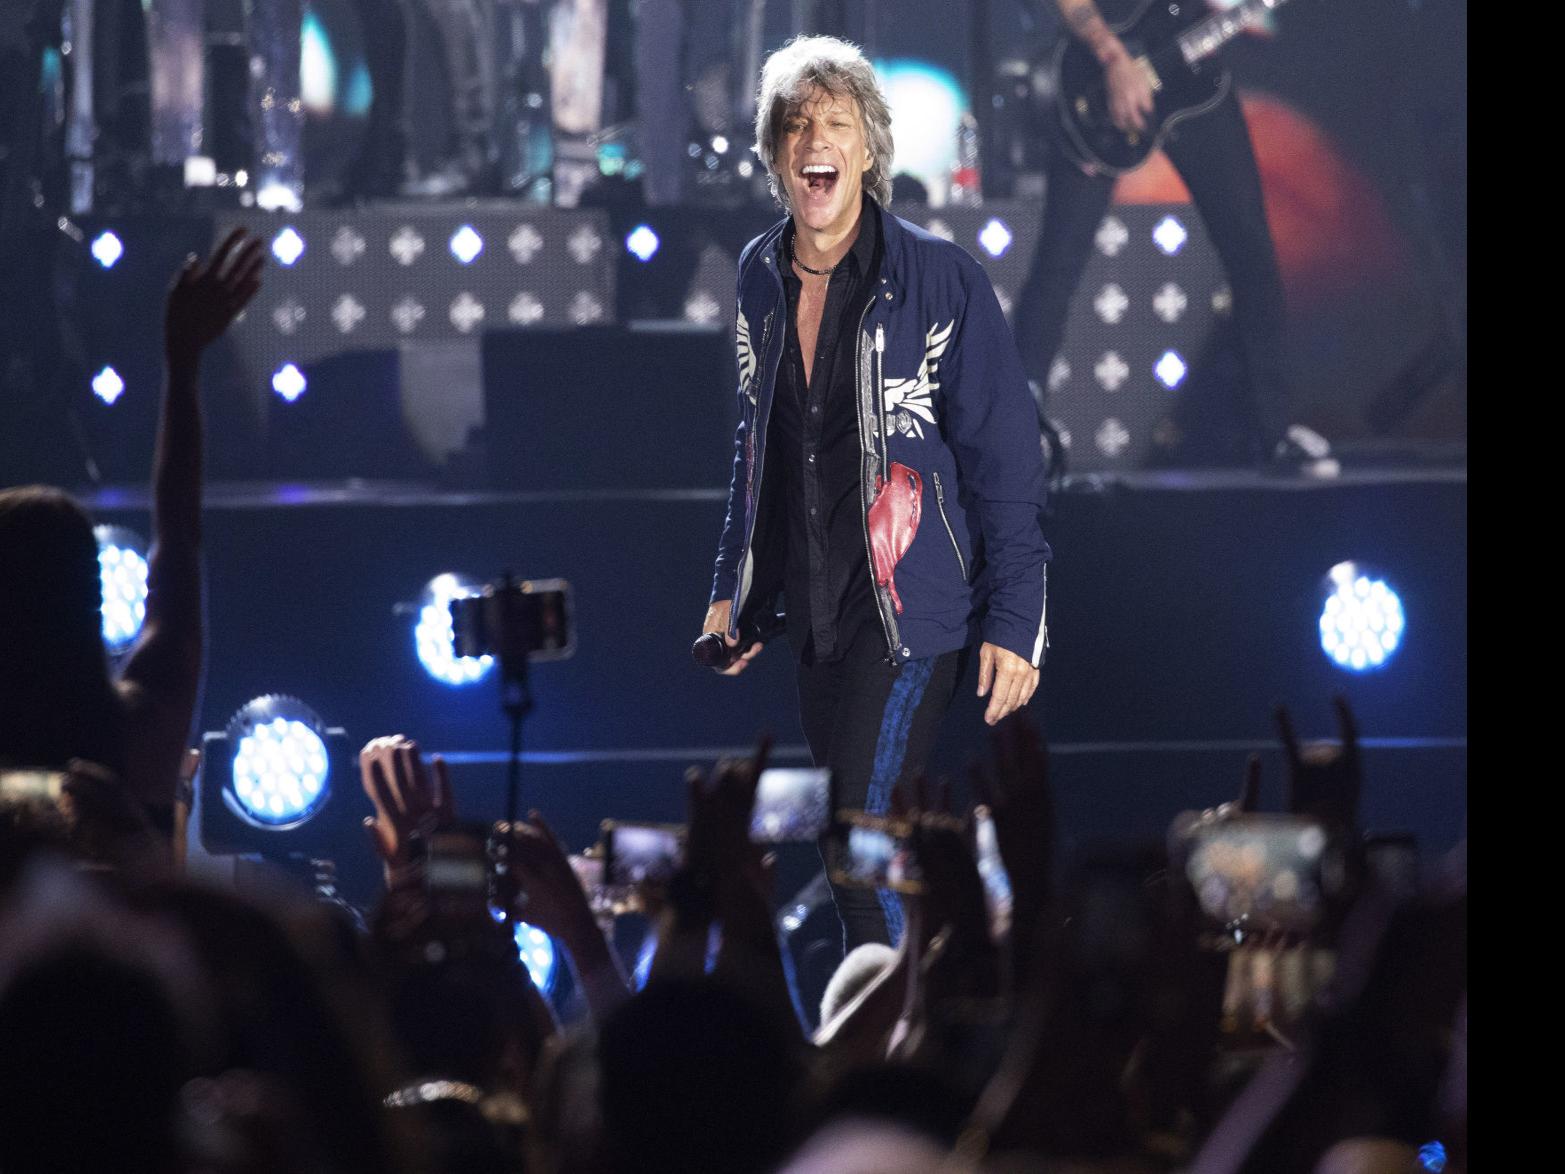 Bon Jovi Cancels 2020 Tour Including St Louis Date So Fans Can Get Refunds To Pay Bills The Blender Stltoday Com - cradles roblox id blox music